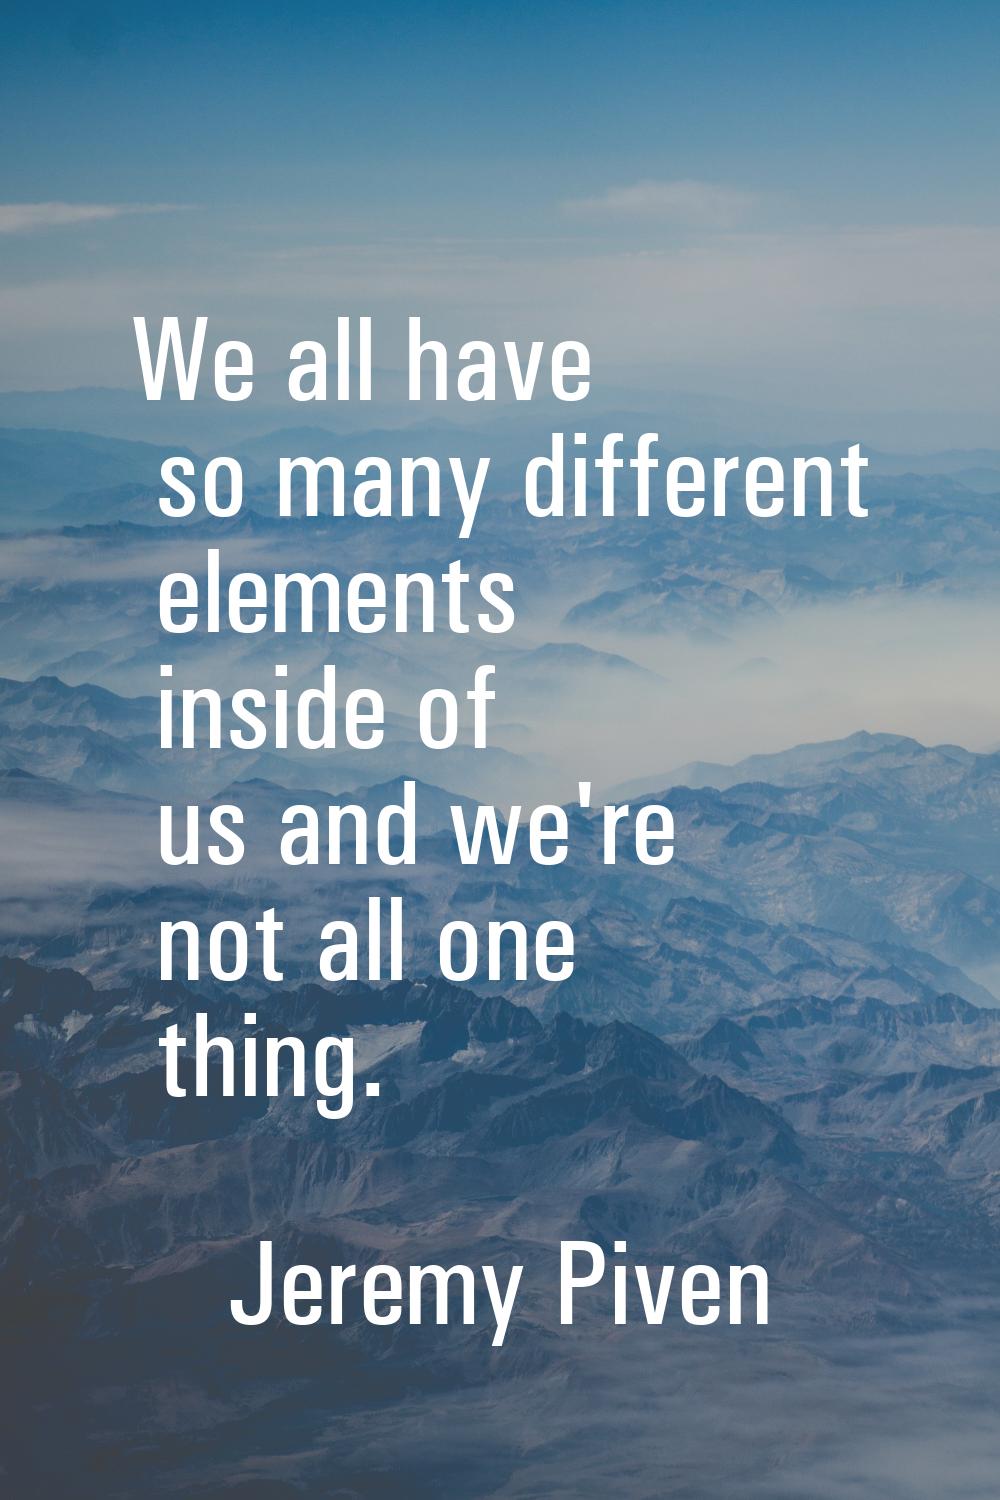 We all have so many different elements inside of us and we're not all one thing.